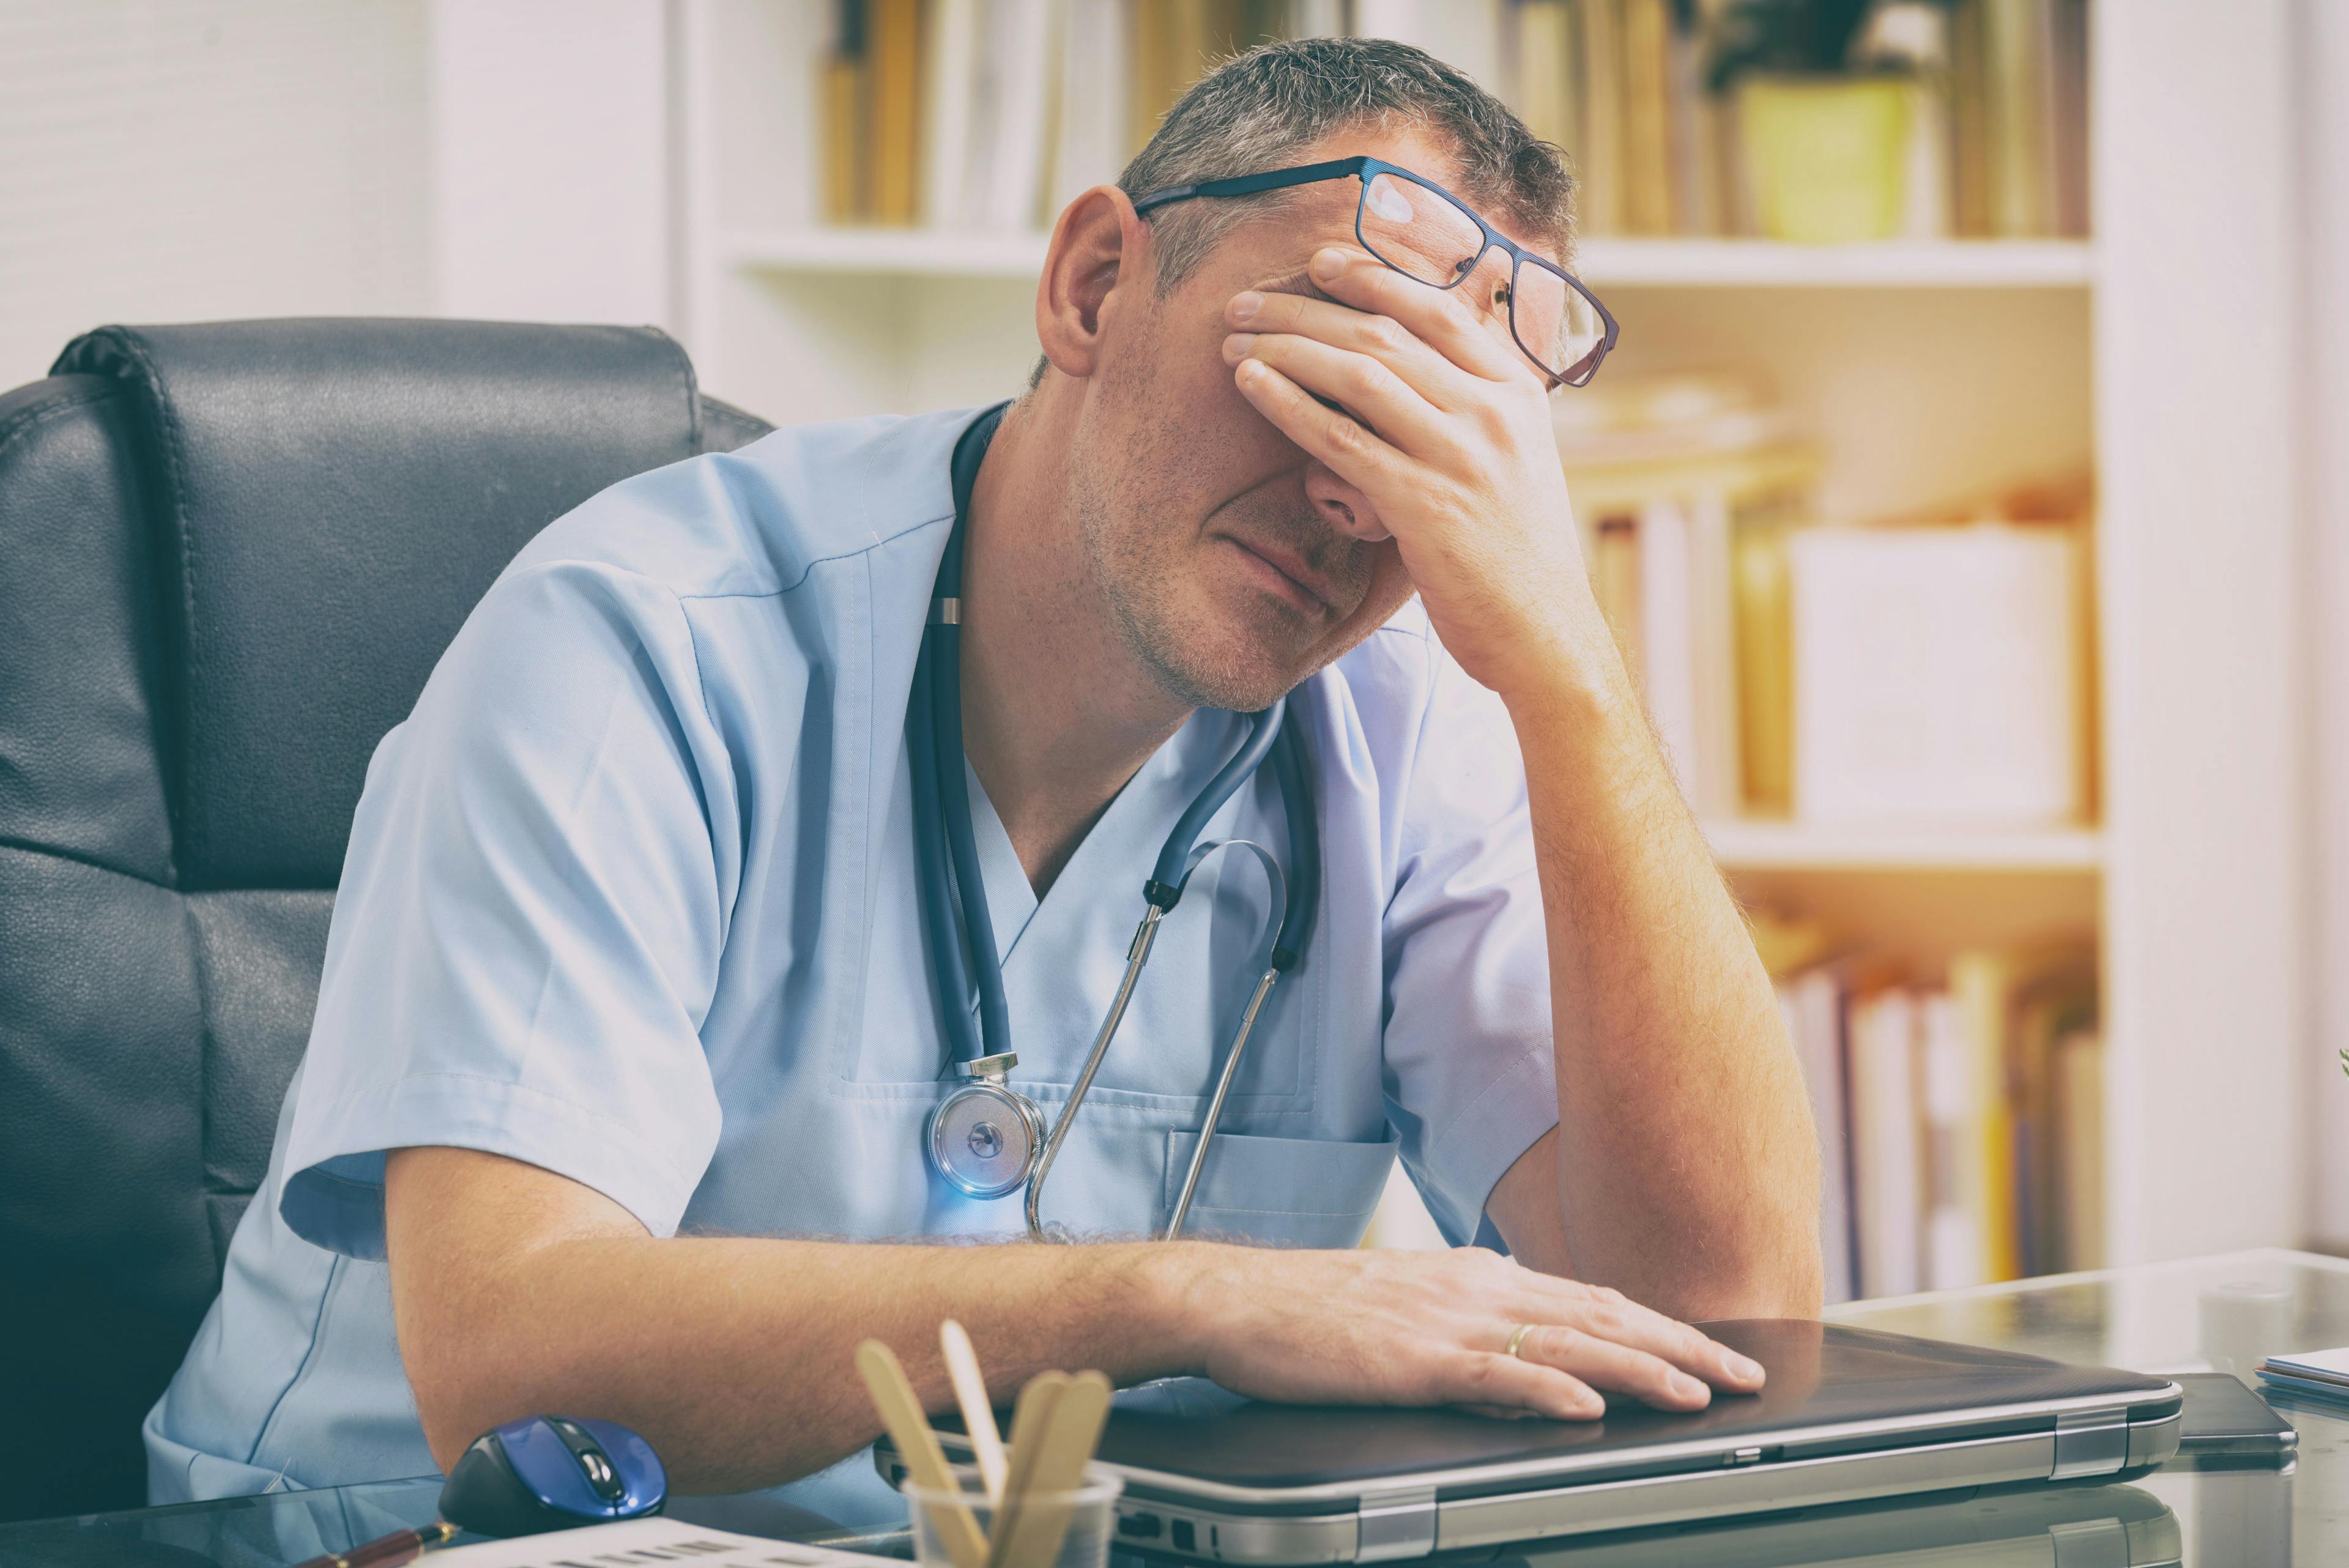 How to recognize and help a physician colleague in emotional distress